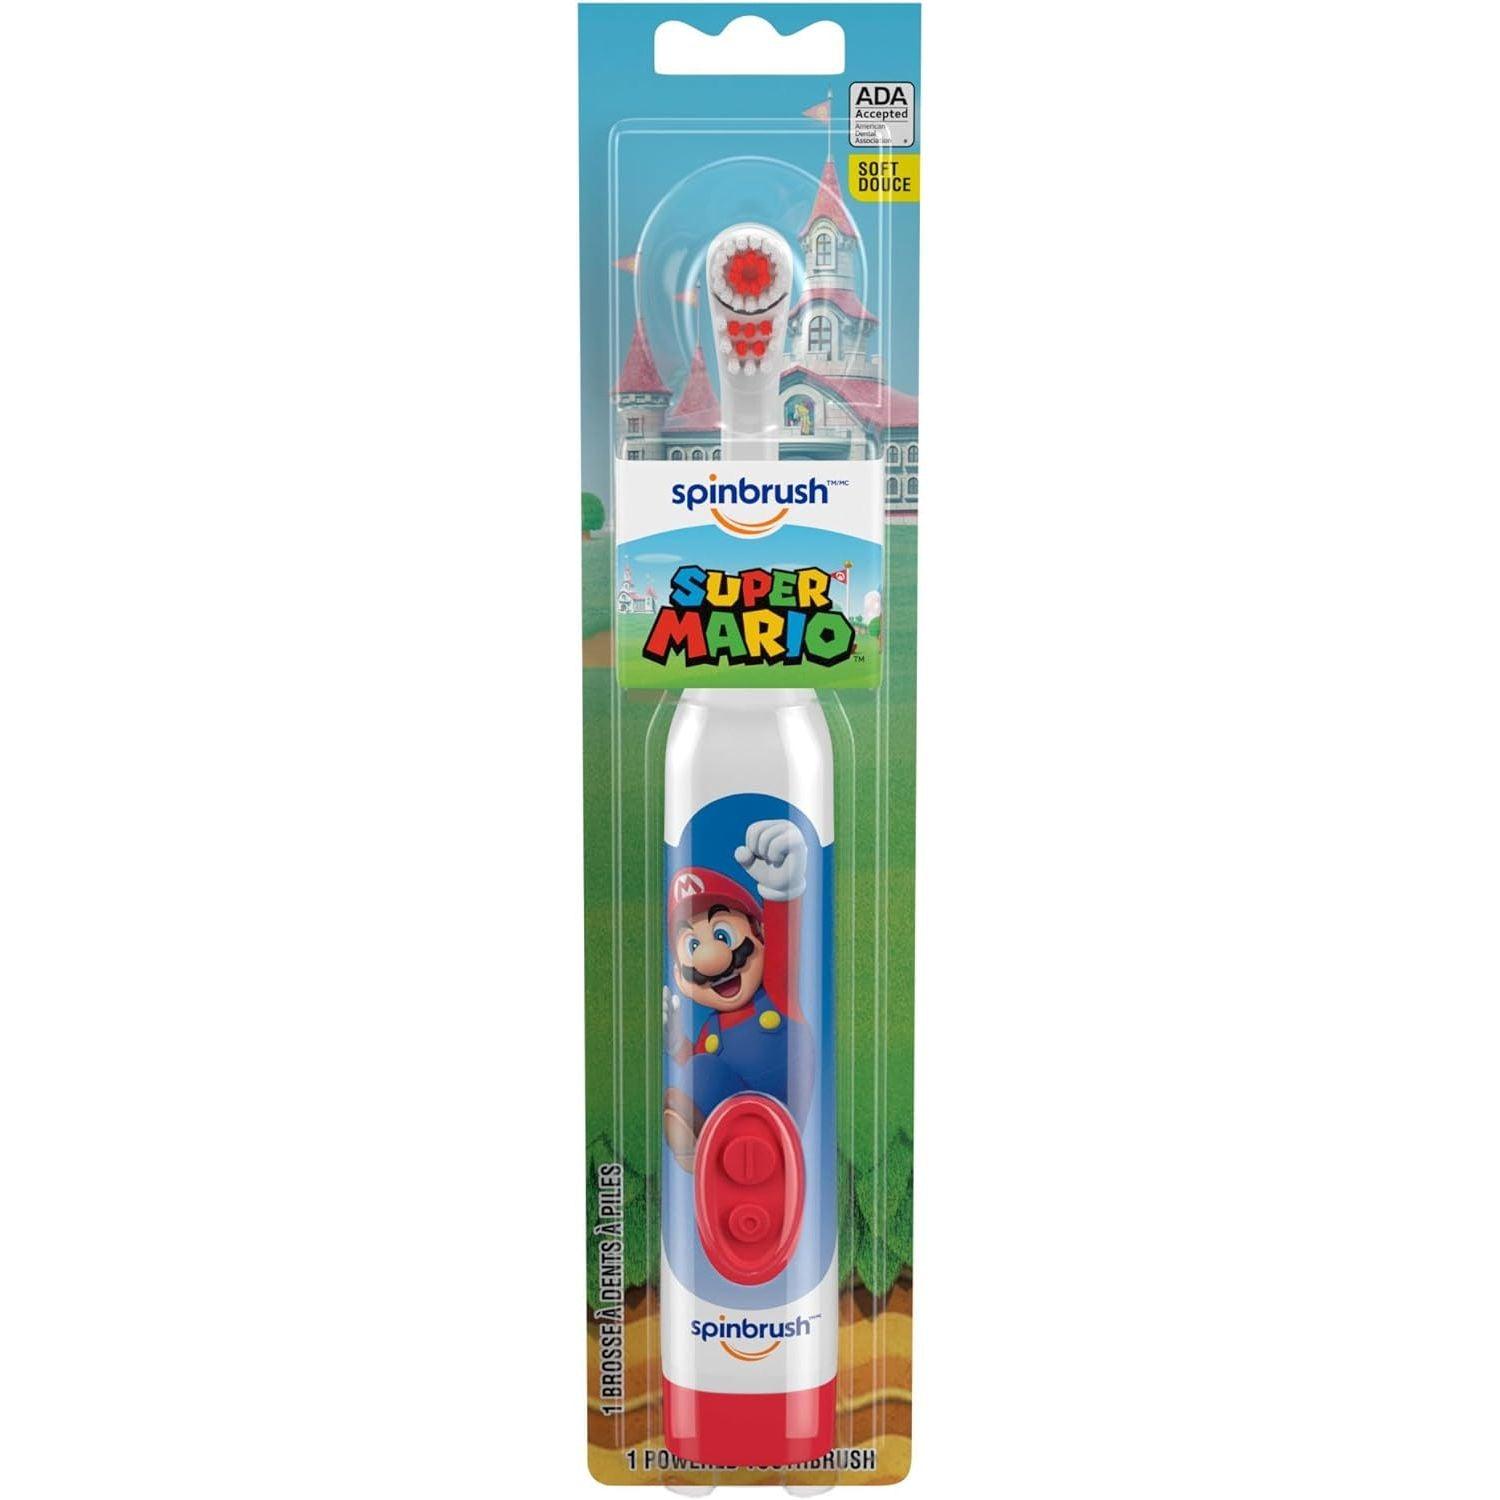 Super Mario Kid’s Spinbrush Electric Battery Toothbrush, Soft, 1 ct, Character May Vary - BumbleToys - 5-7 Years, 8-13 Years, Baby Saftey & Health, Boys, Super Mario, Toothbrush